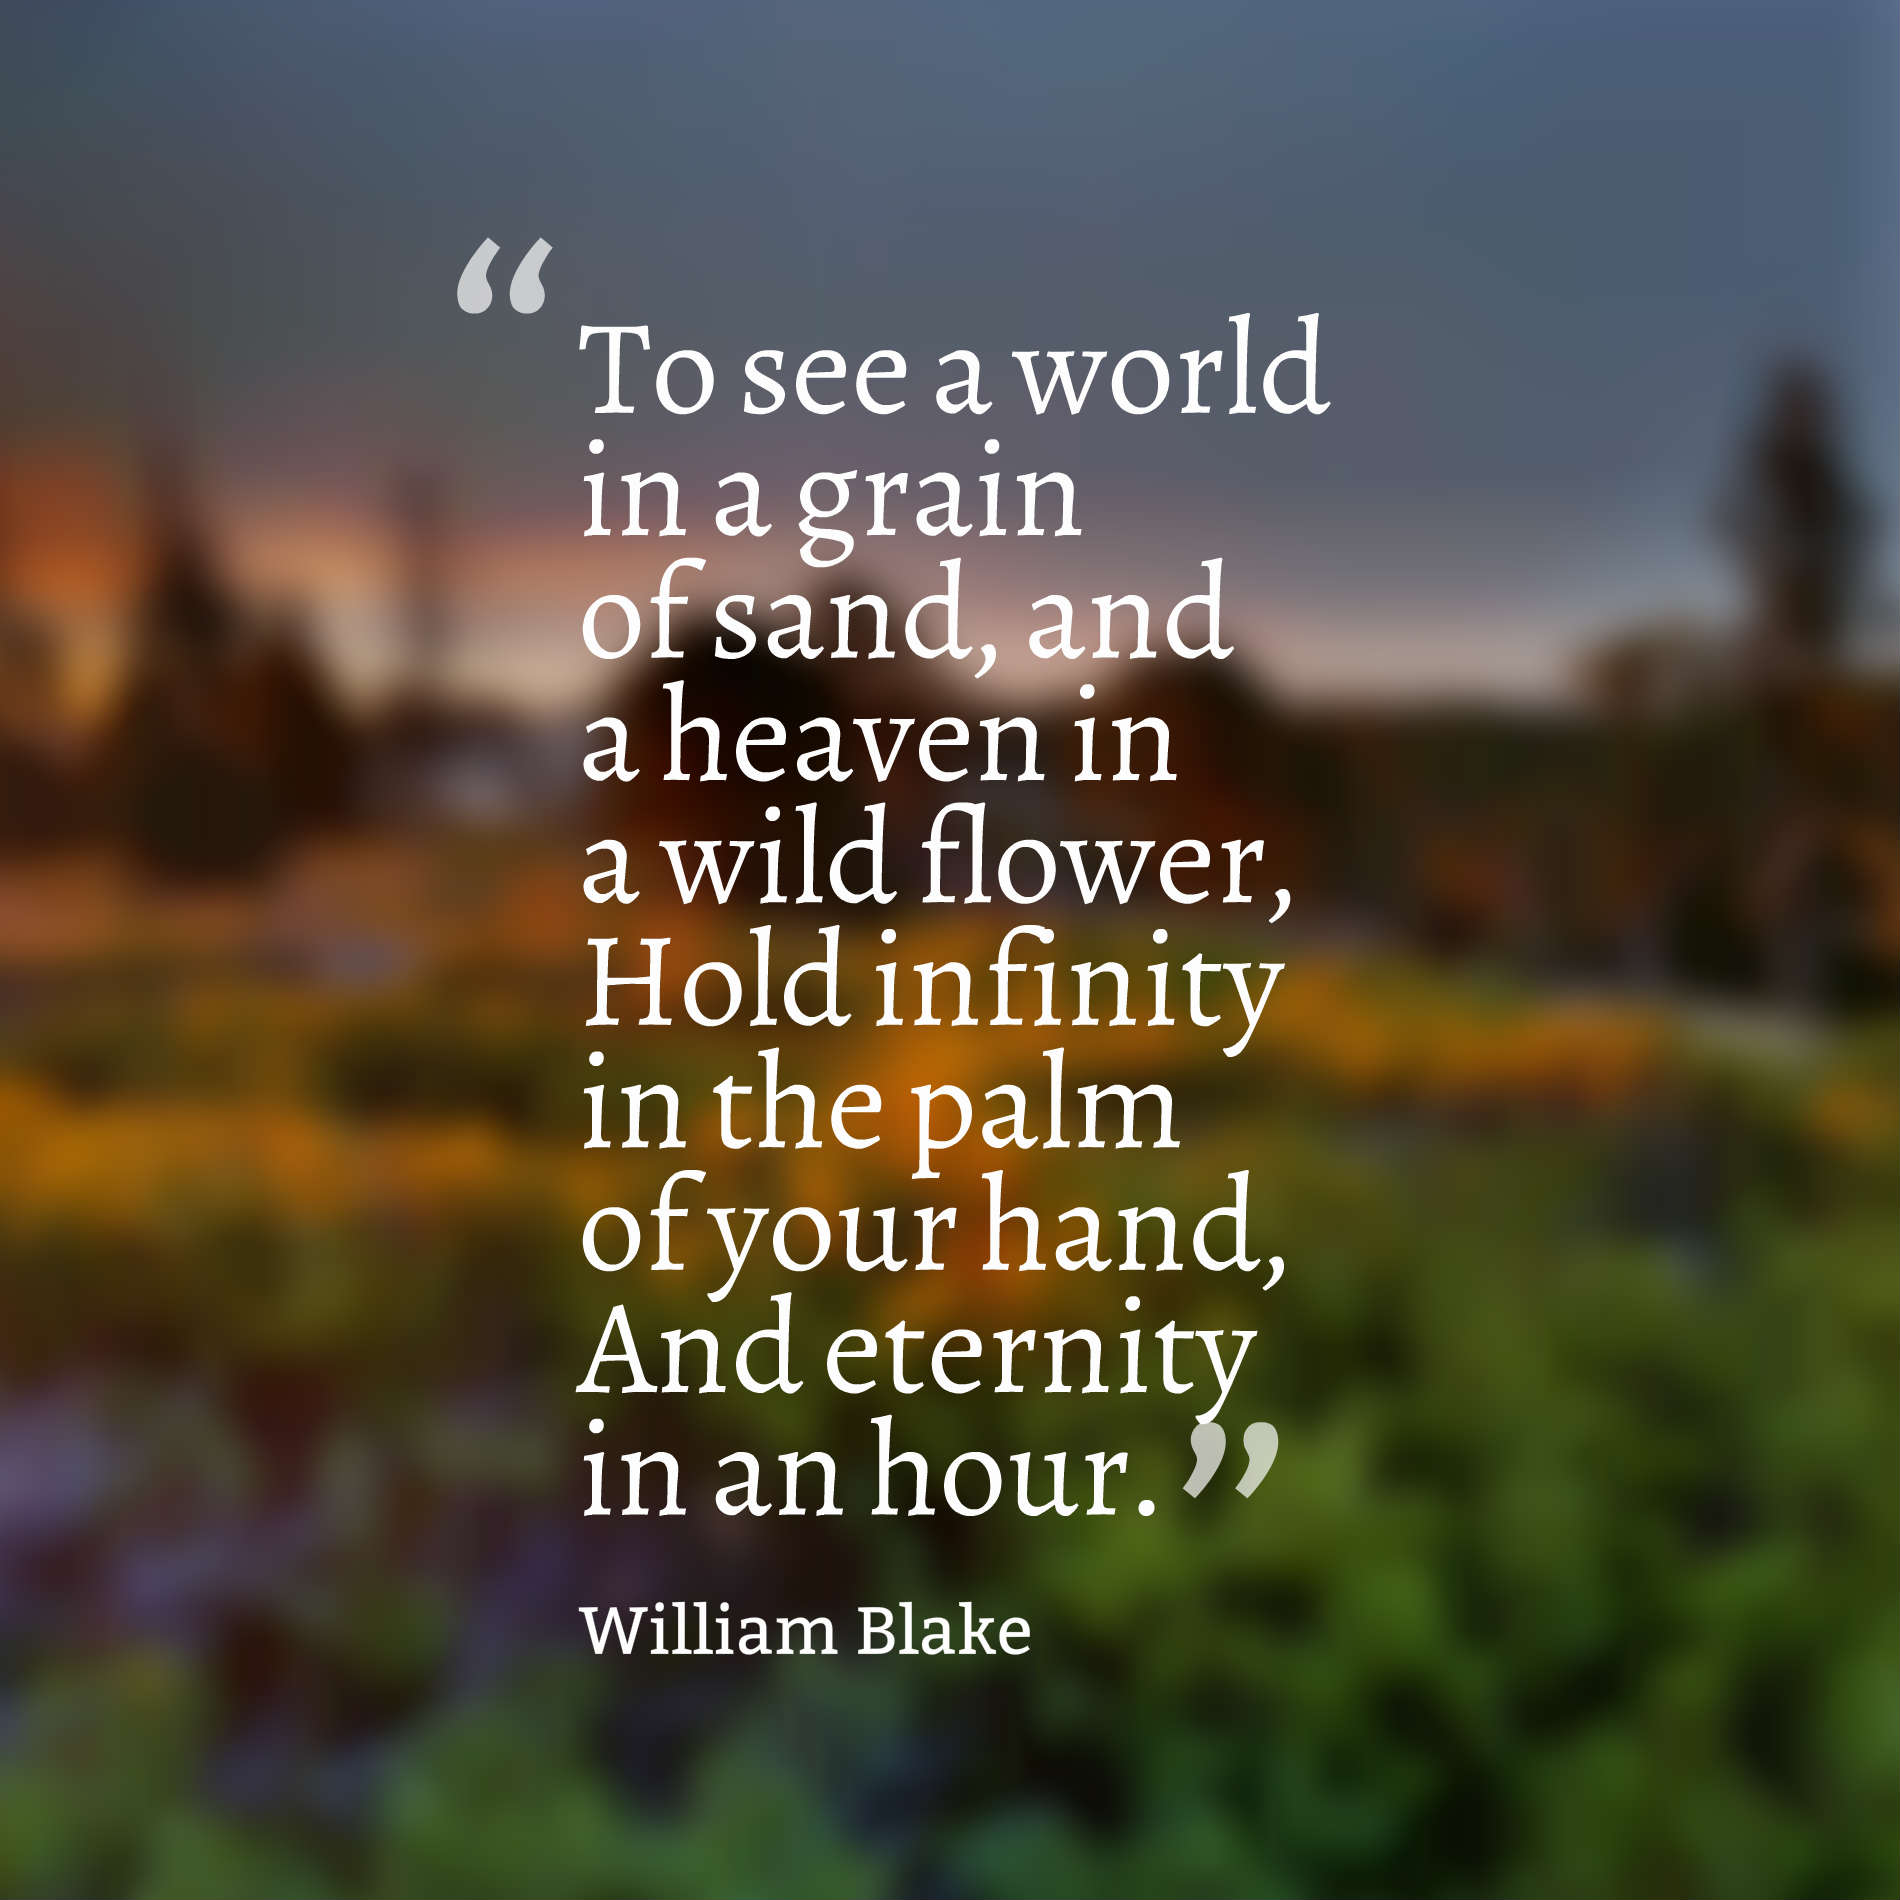 To see a world in a grain of sand, and a heaven in a wild flower, Hold infinity in the palm of your hand, And eternity in an hour.